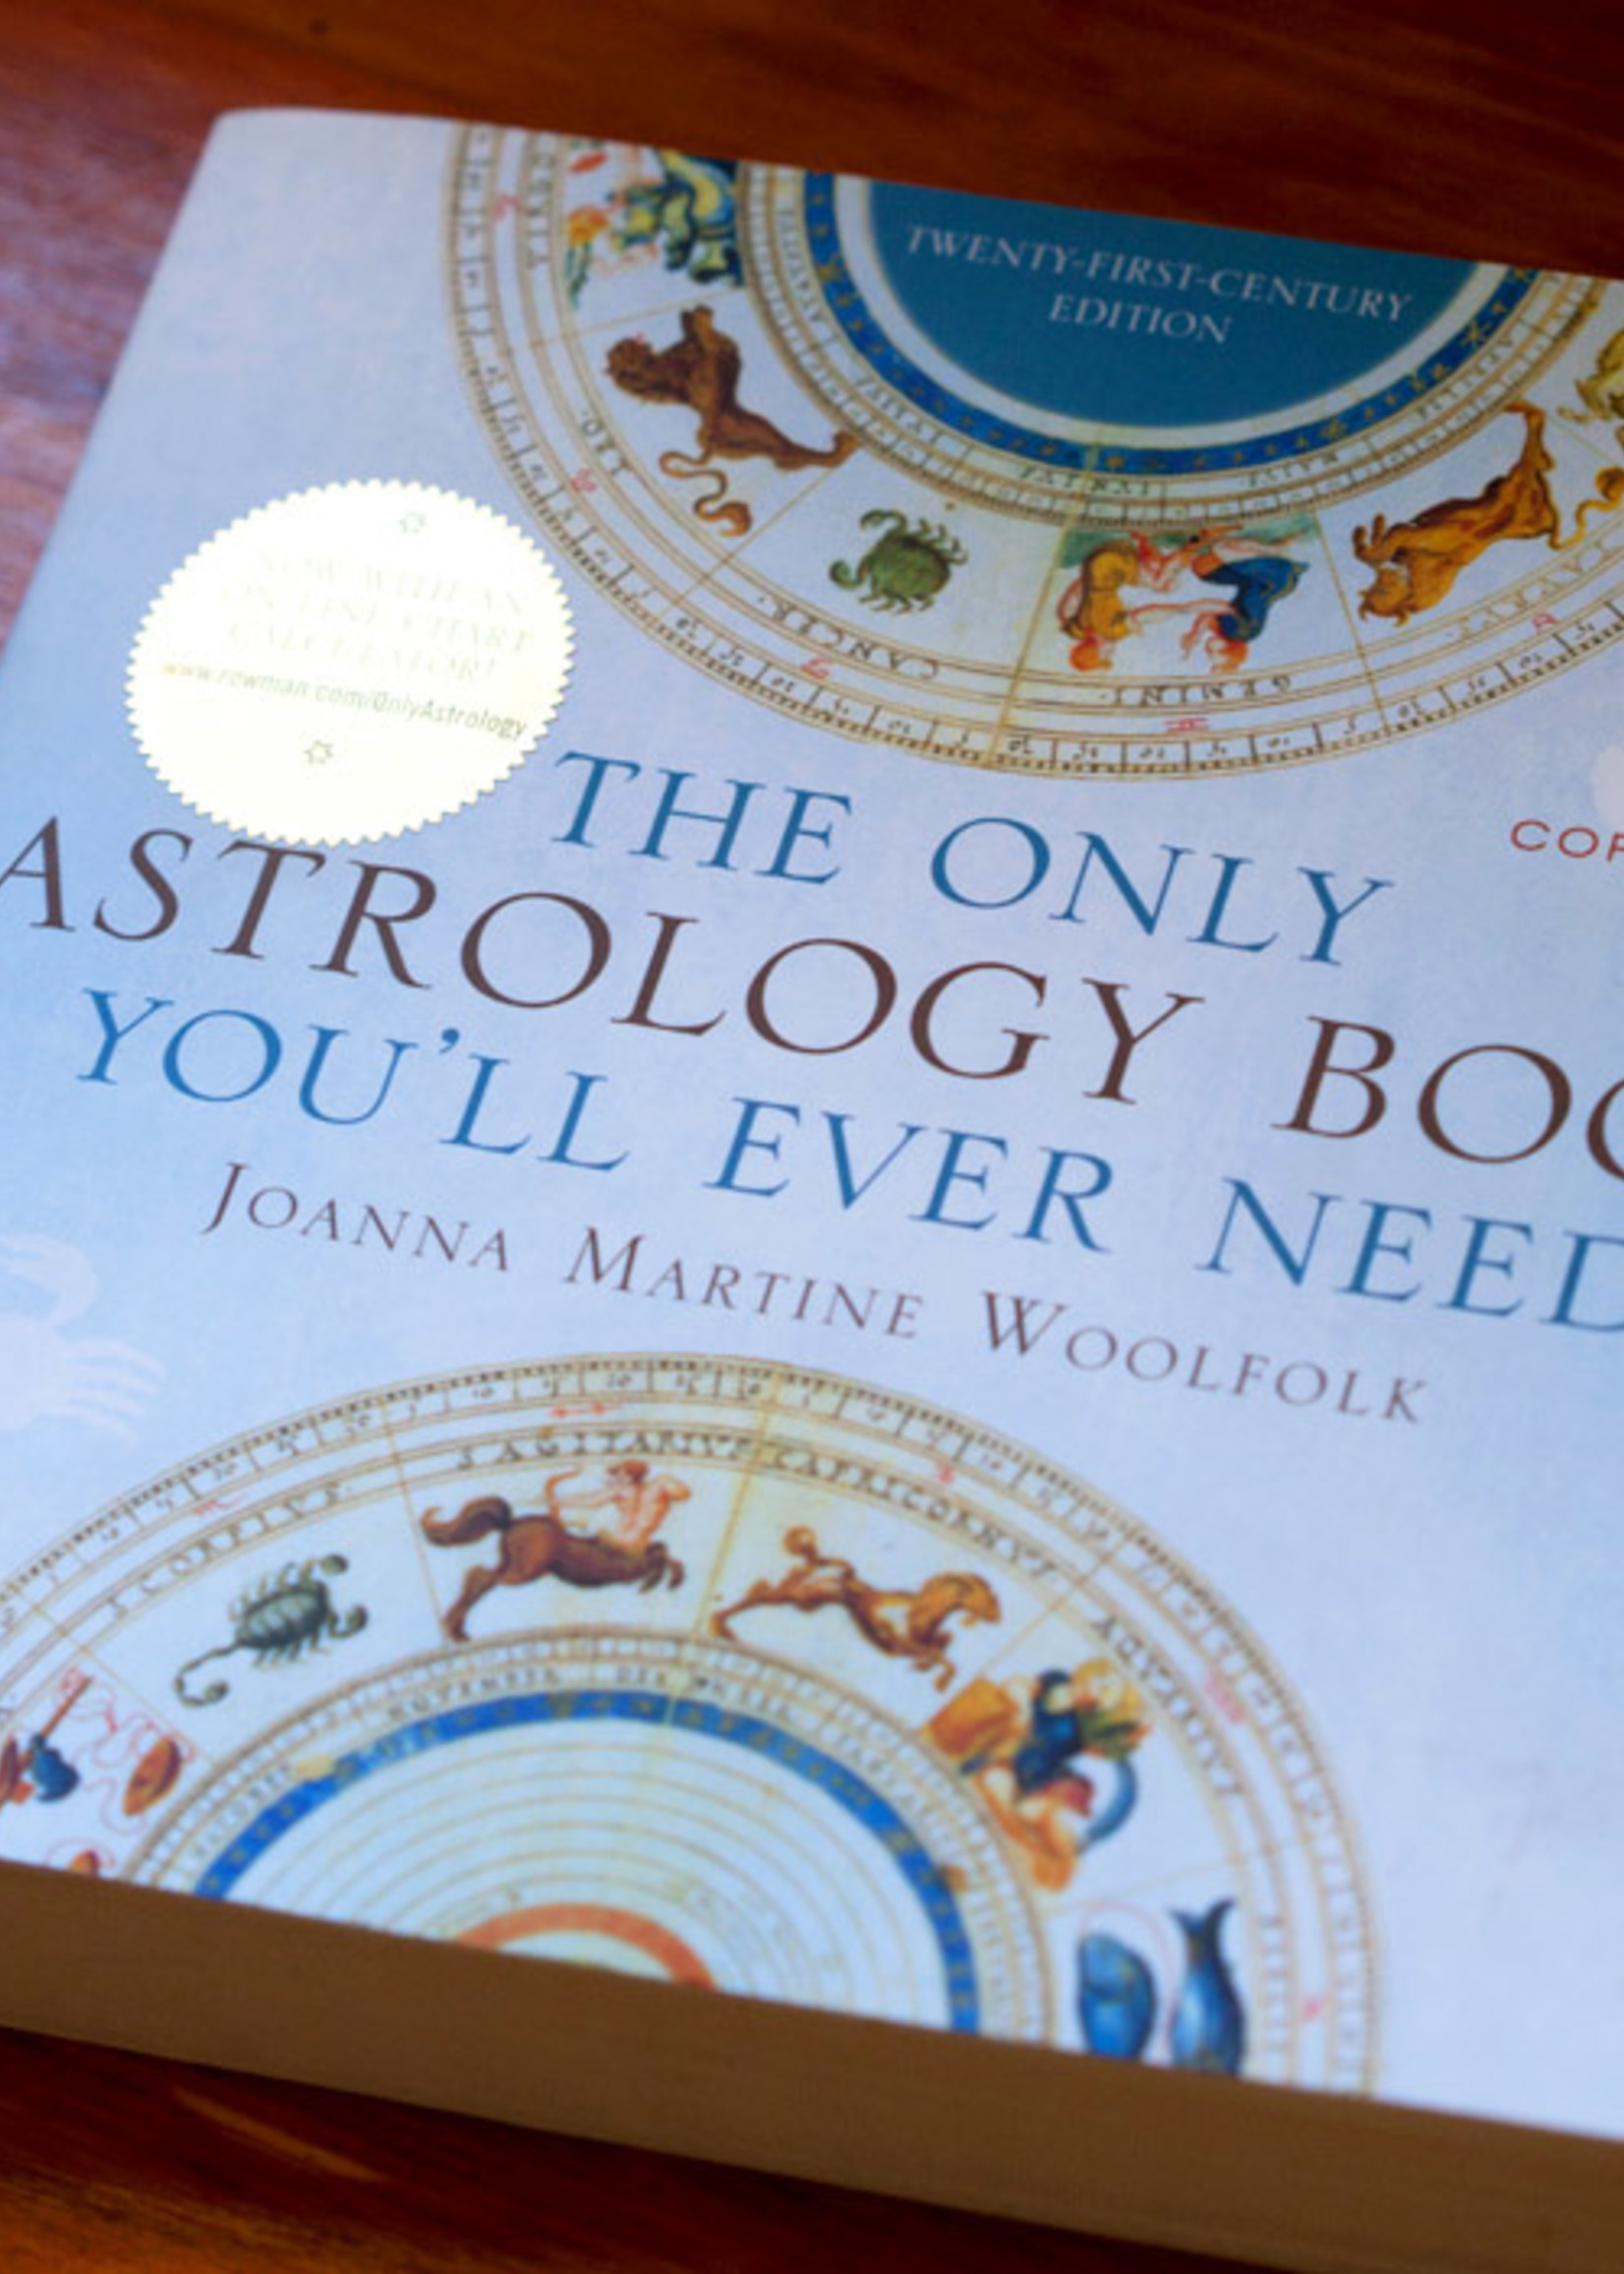 Only Astrology Book You'll Ever Need